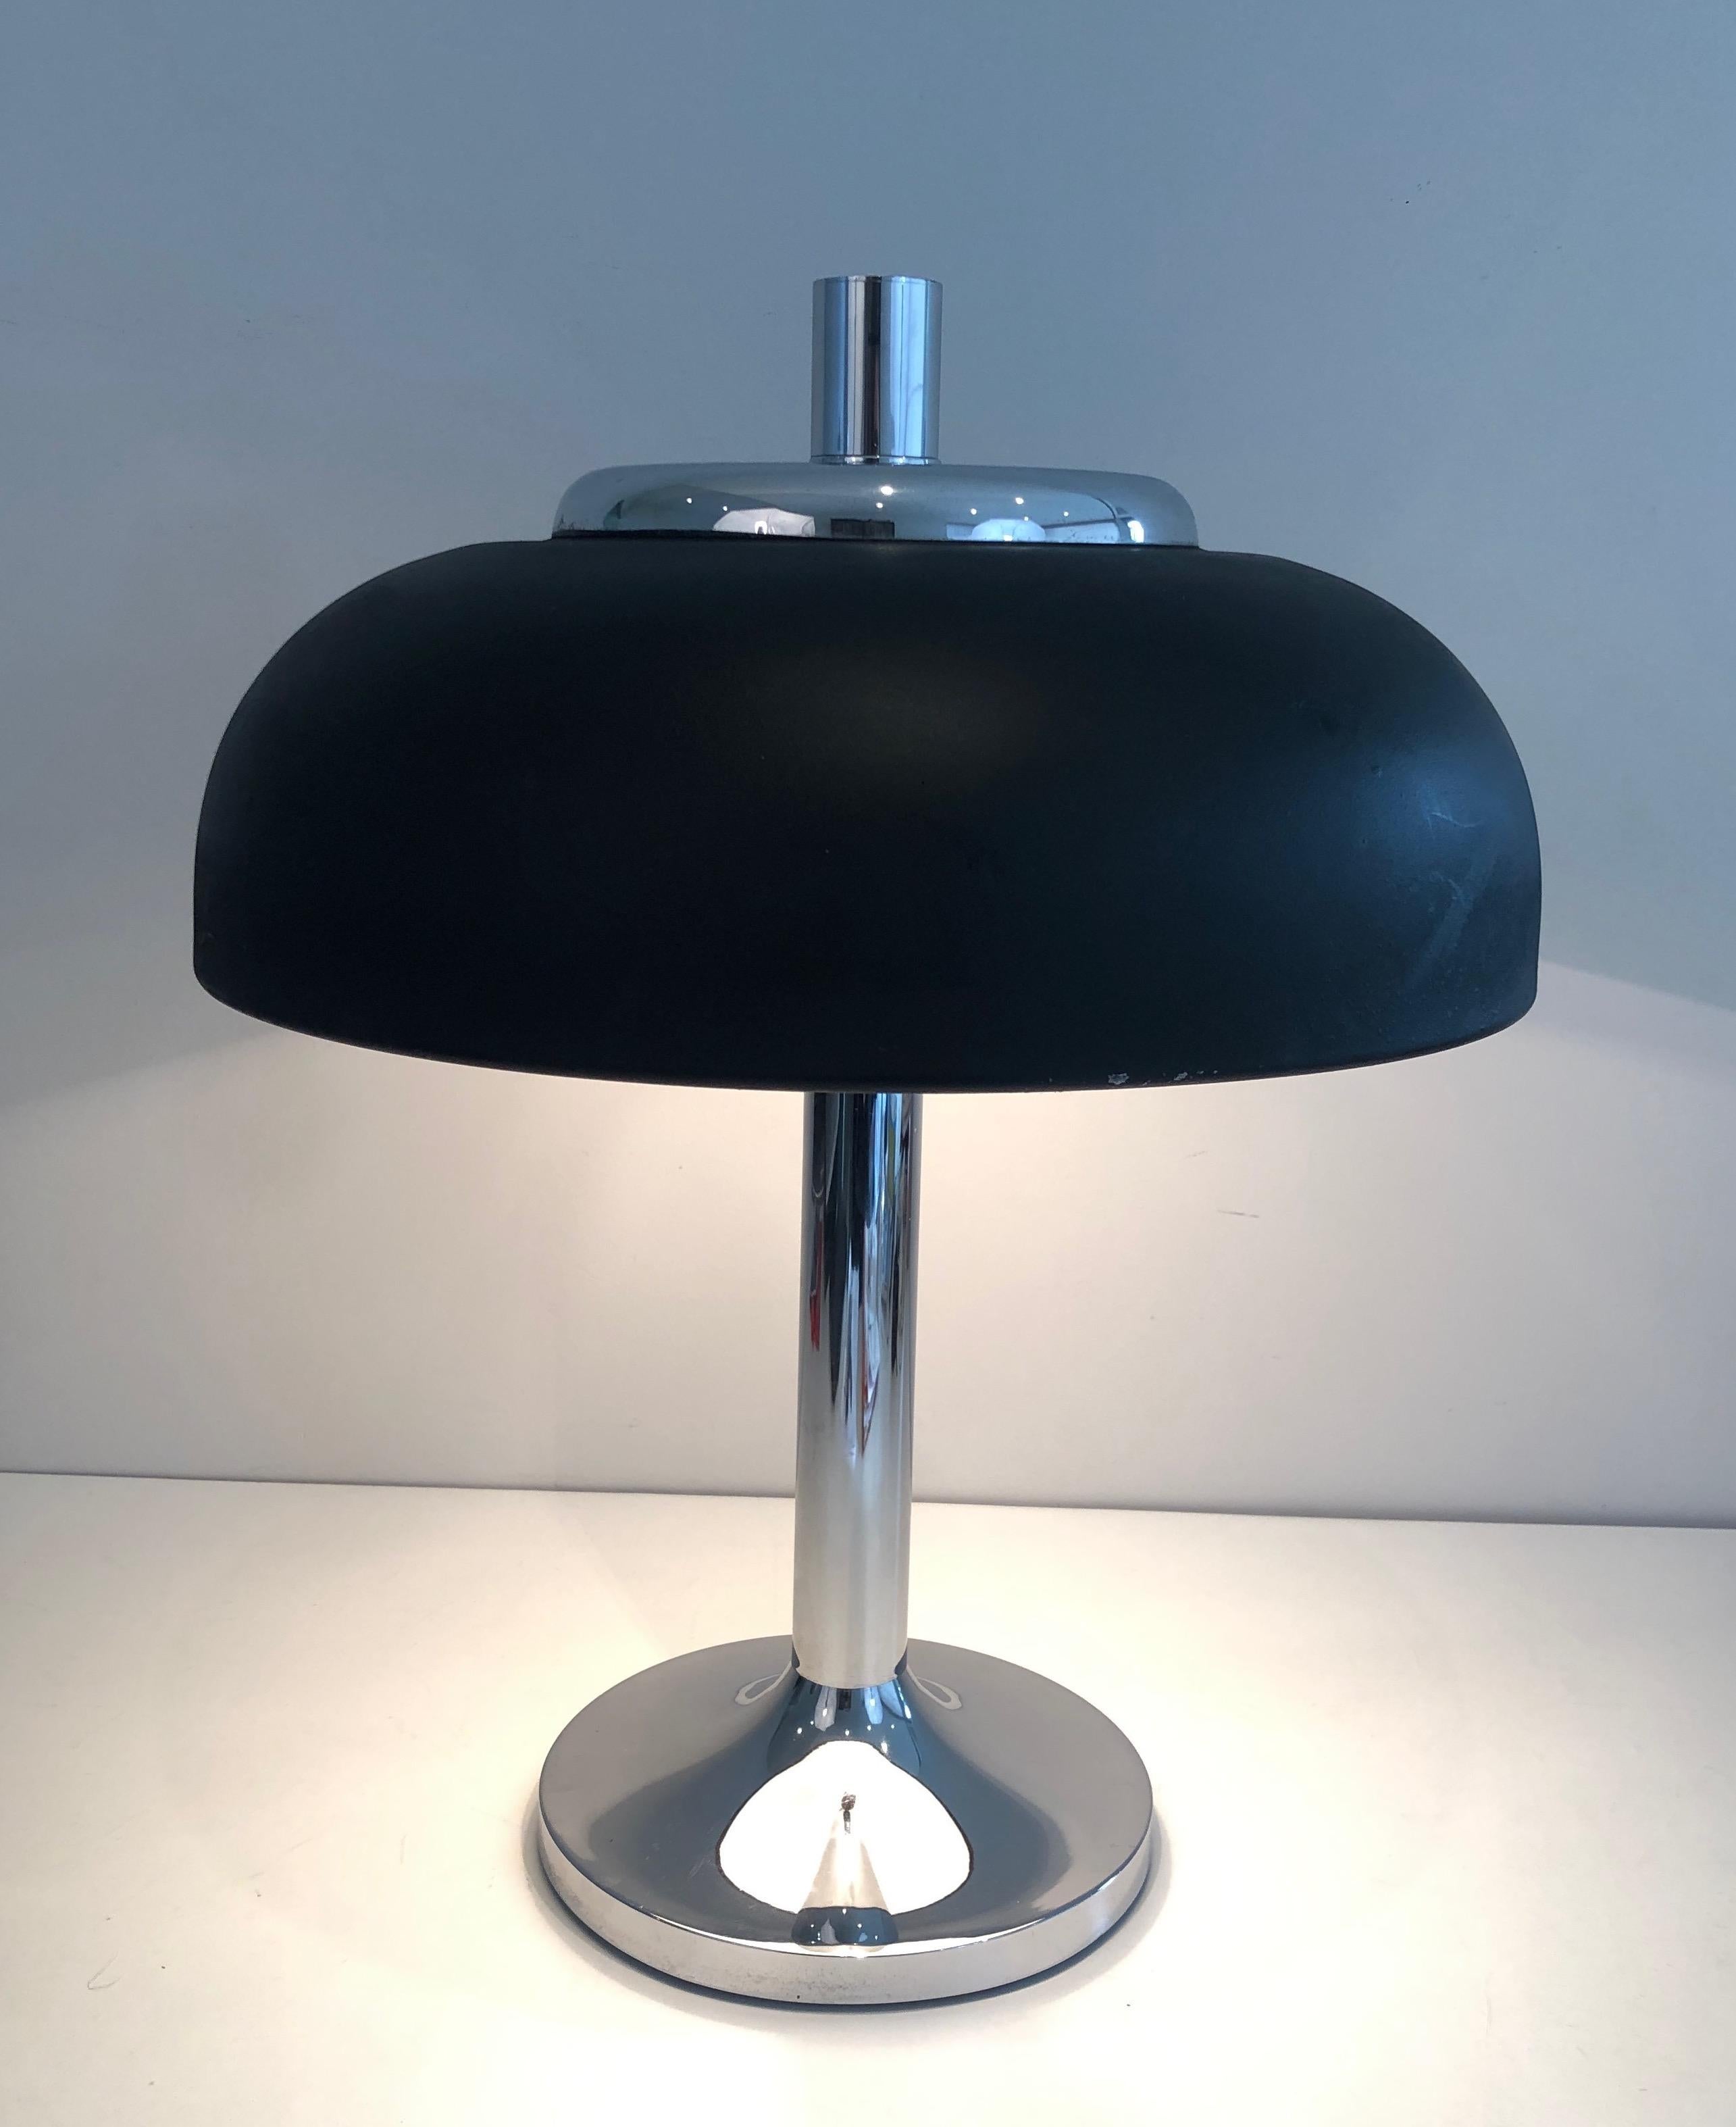 Large Chrome and Black Lacquered Design Table Lamp, French Work, circa 1950 For Sale 6